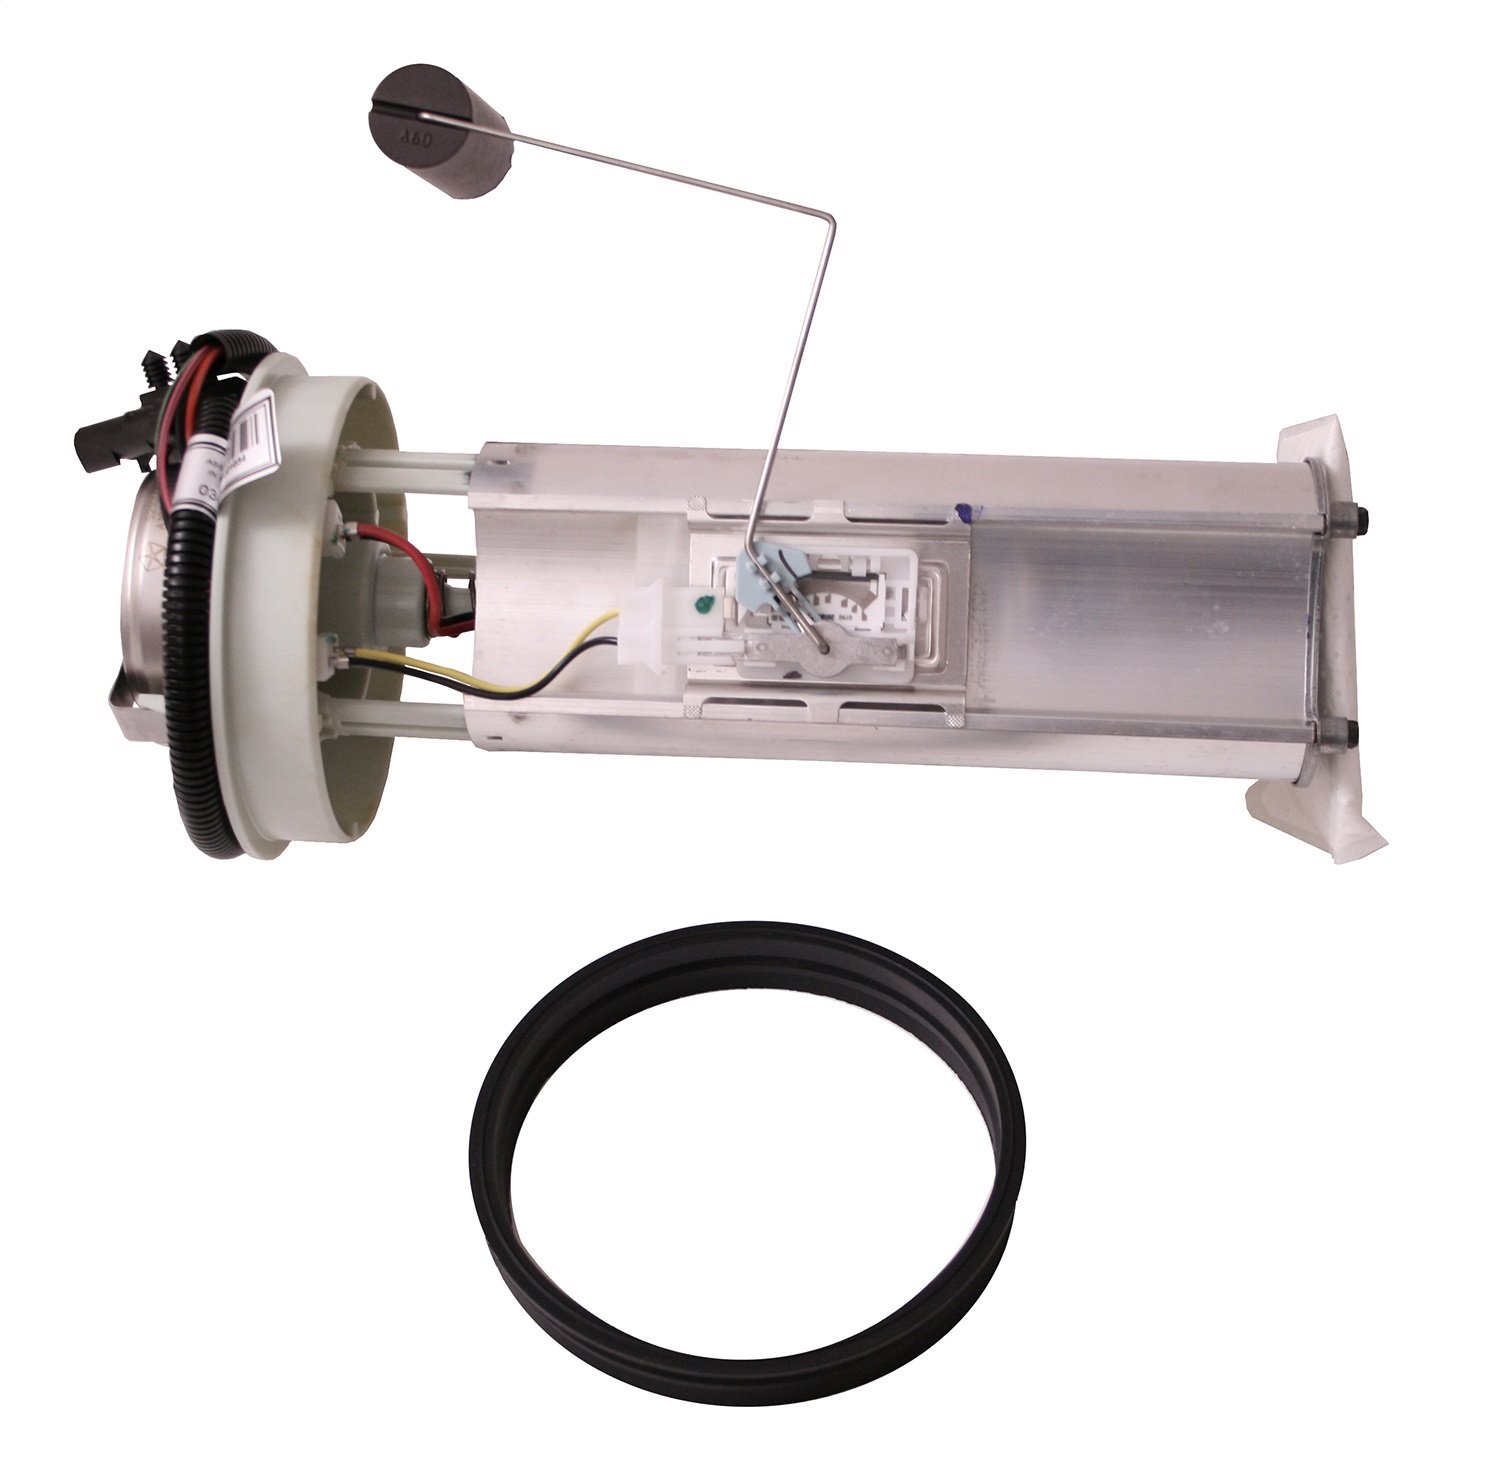 Replacement fuel pump module from Omix-ADA, Fits 97-99 Jeep Wrangler TJ with 2.5L and 4.0L e